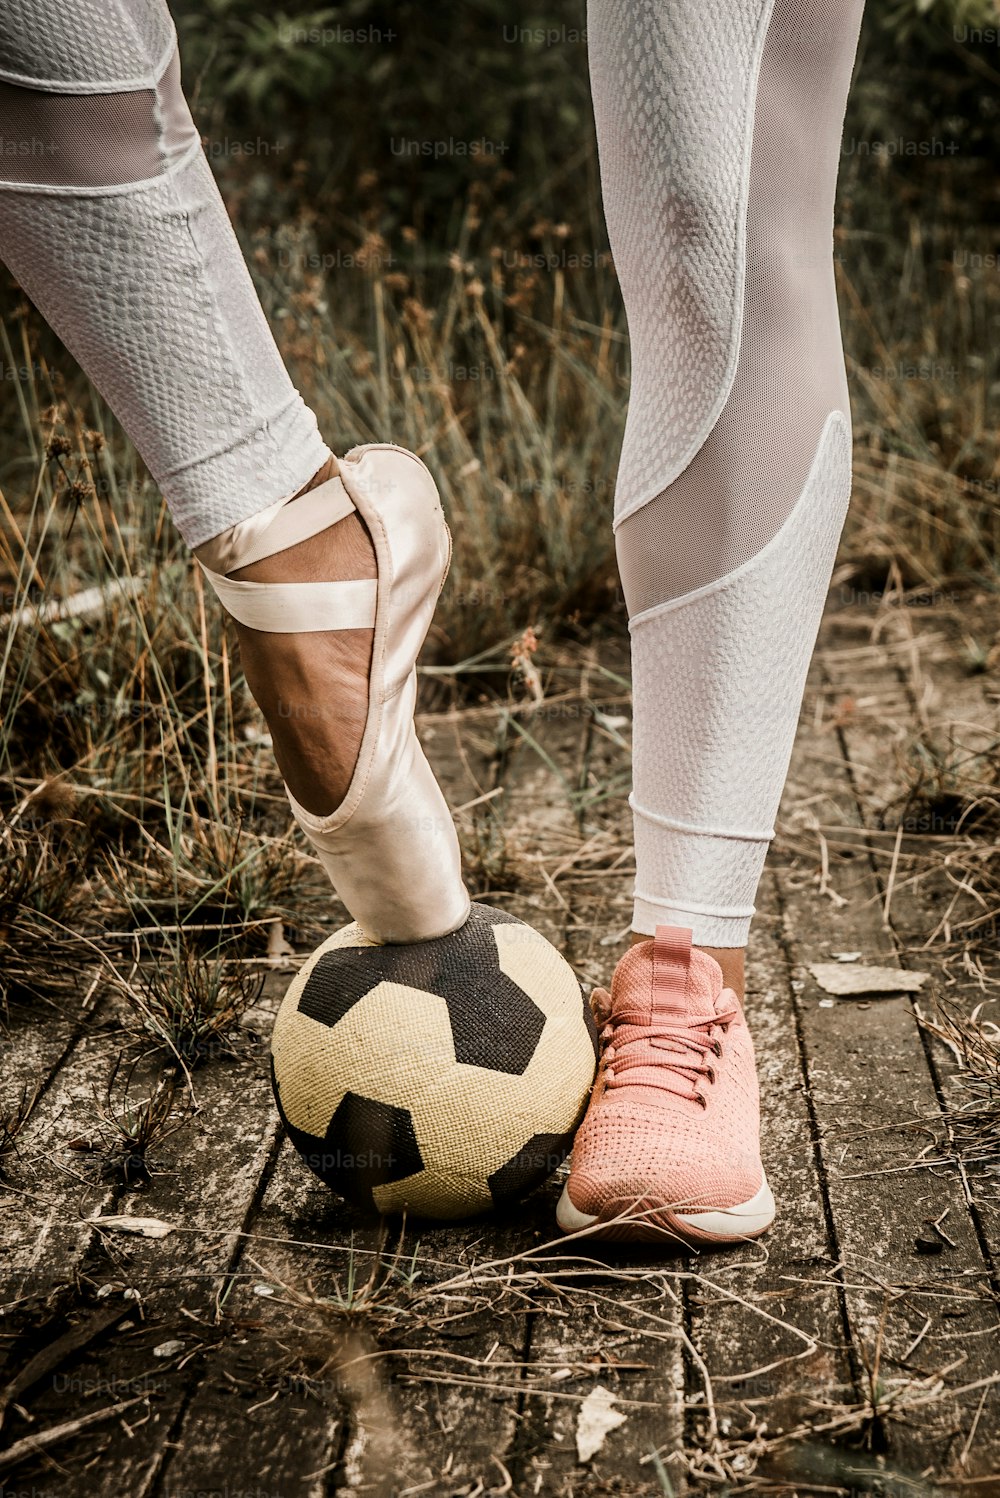 a person standing next to a soccer ball